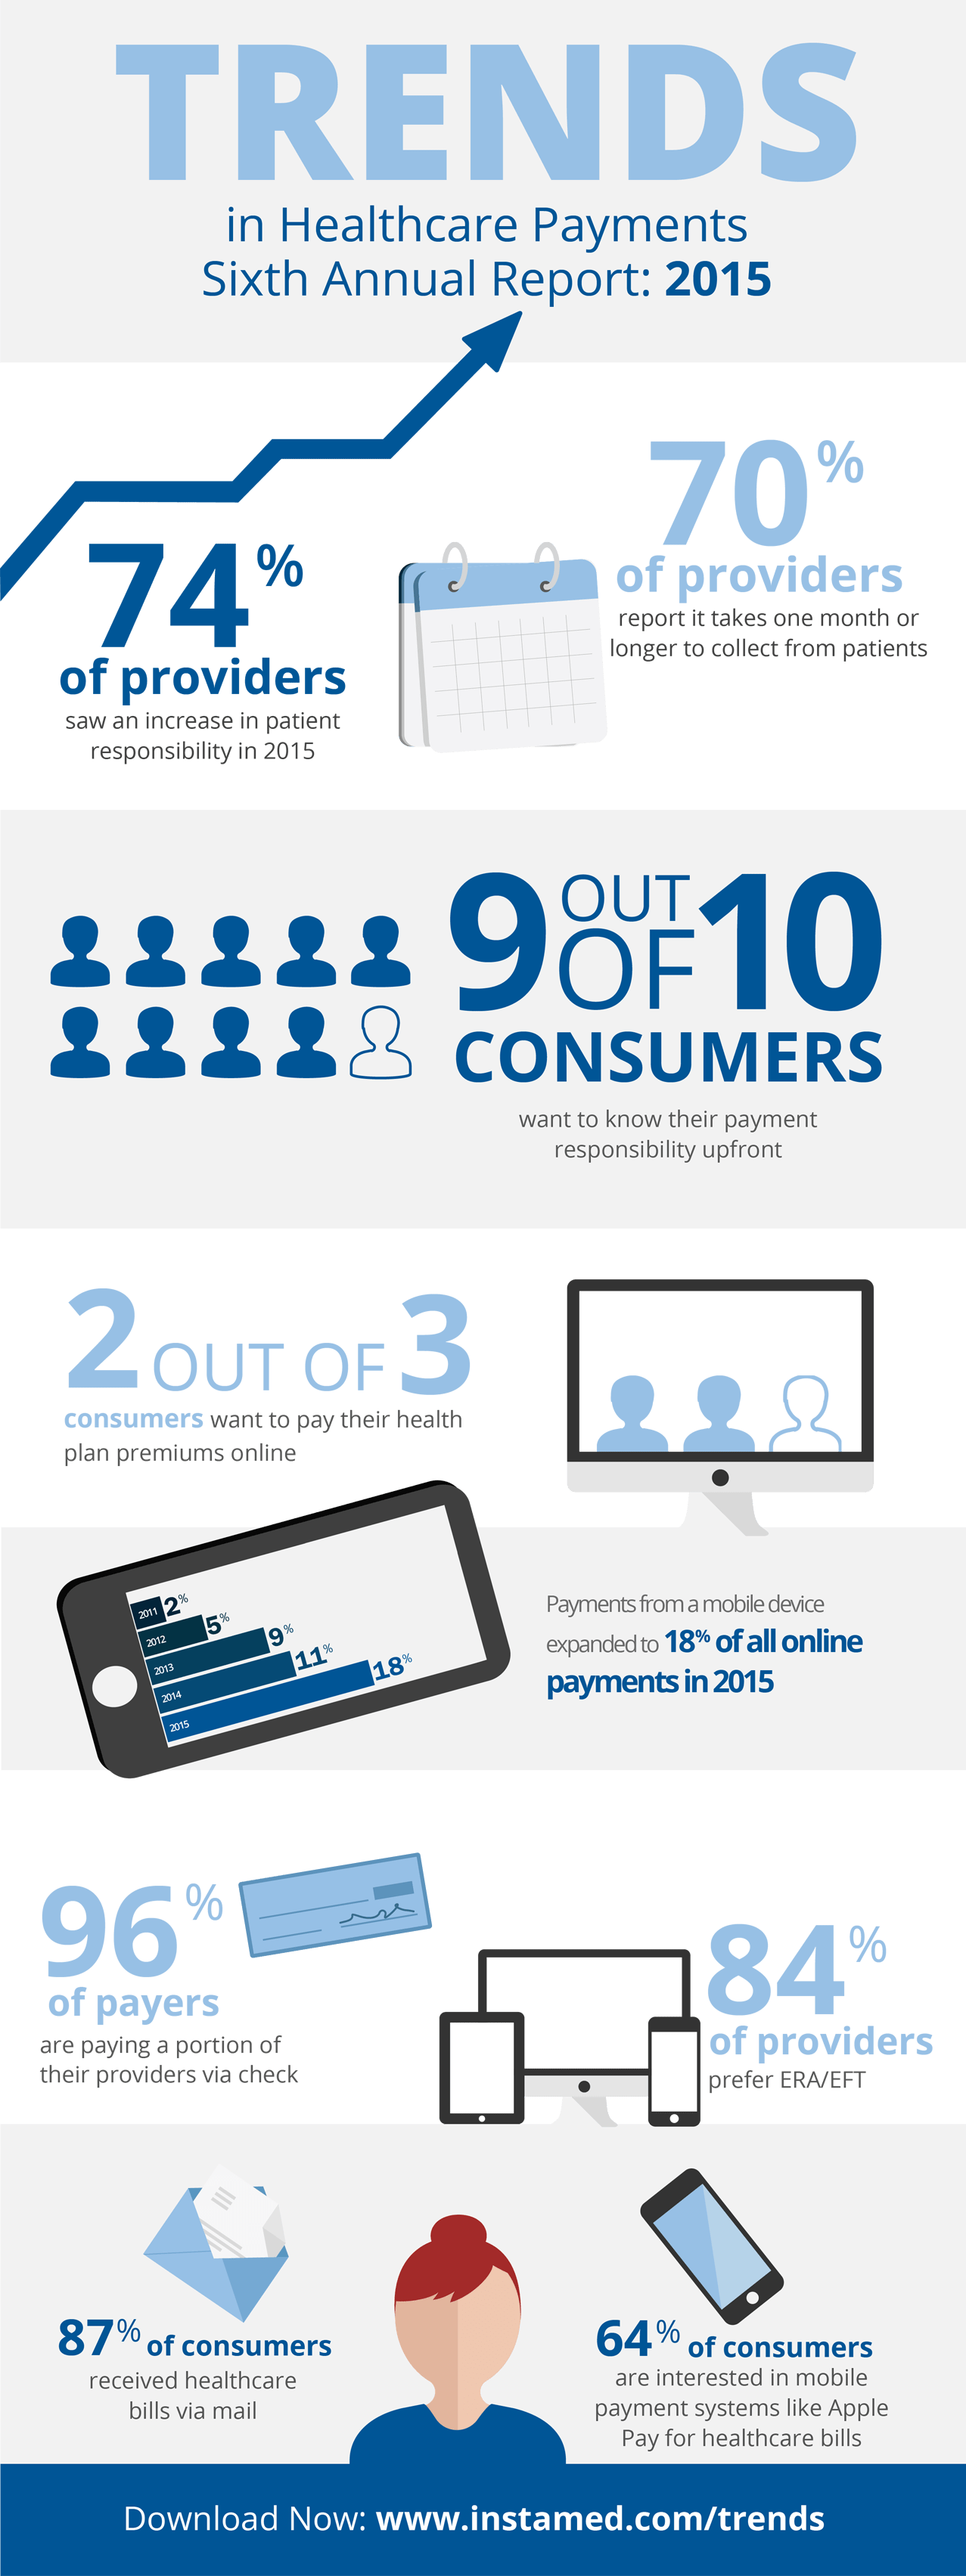 2015 trends in healthcare payments infographic